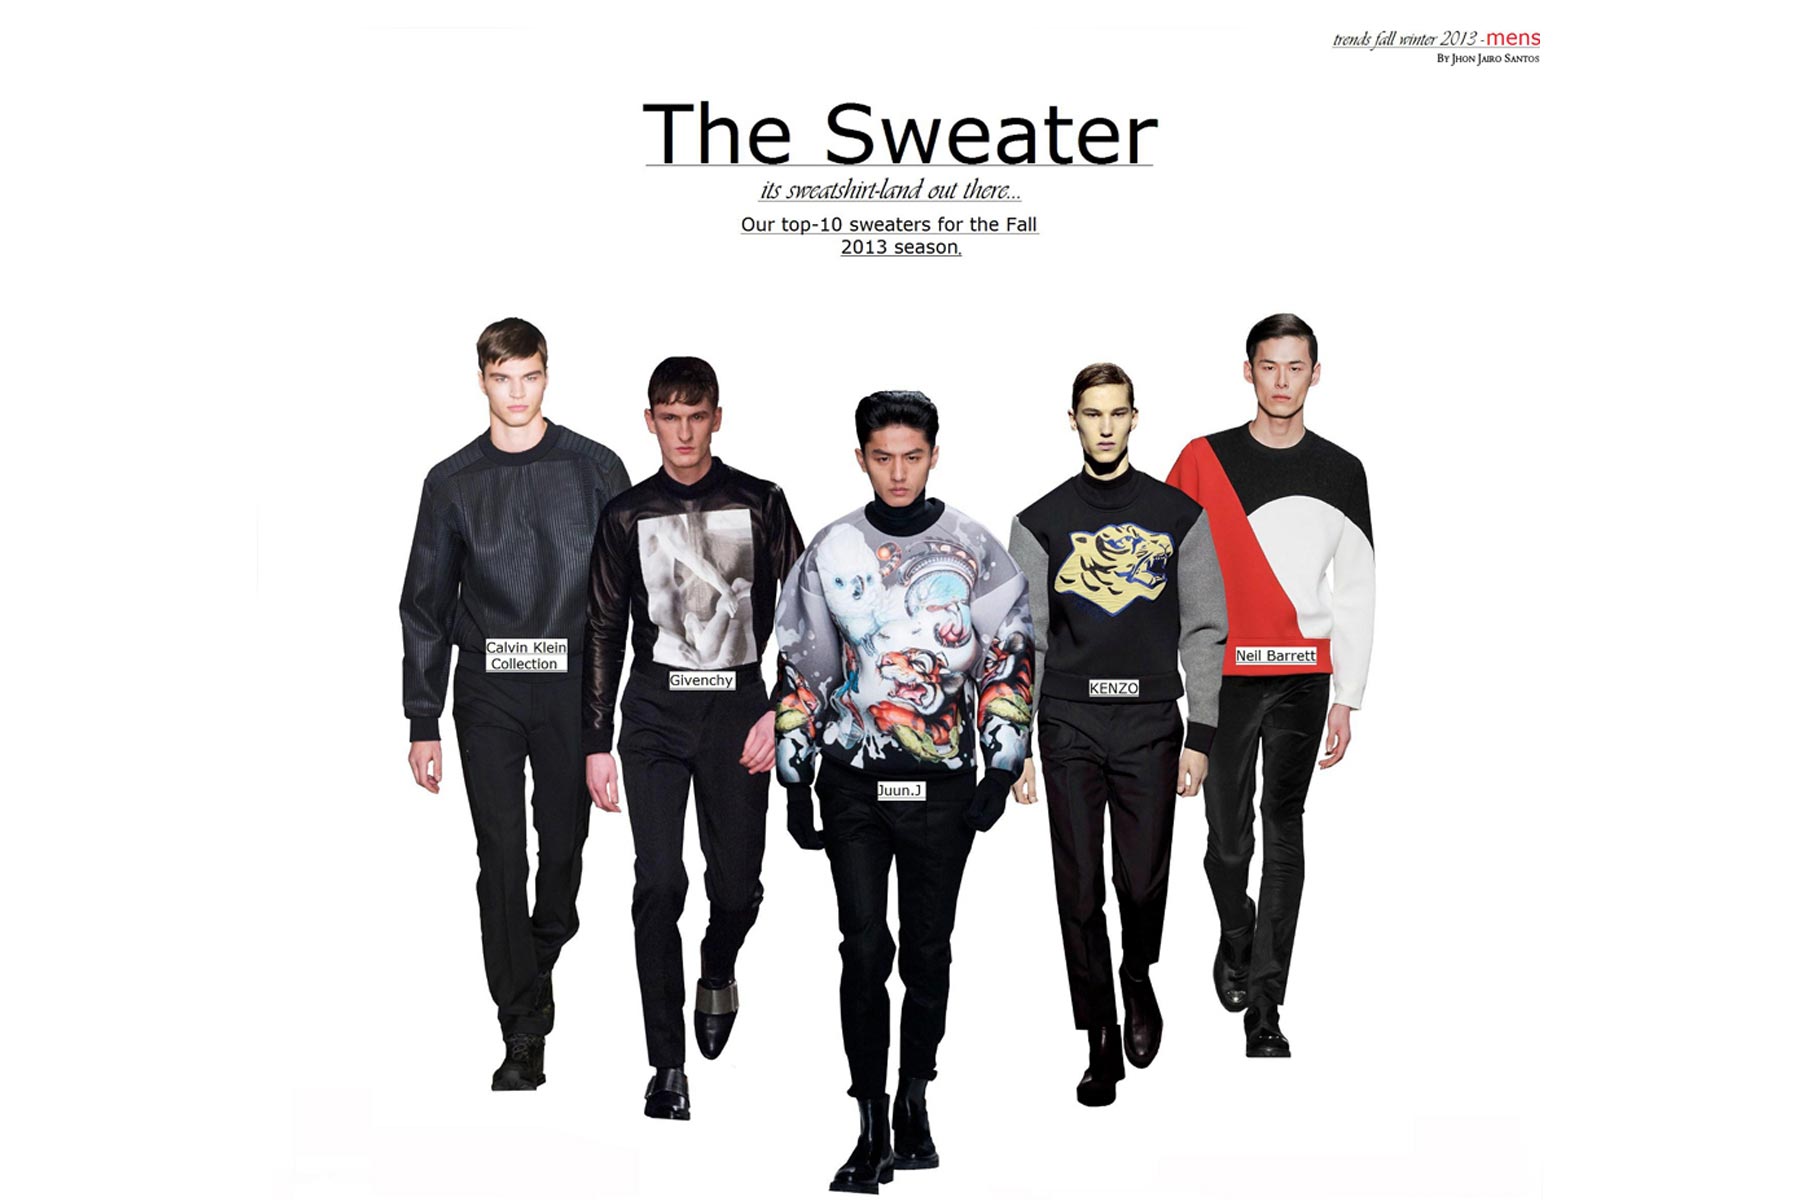 The Sweater â€“ Trend Report